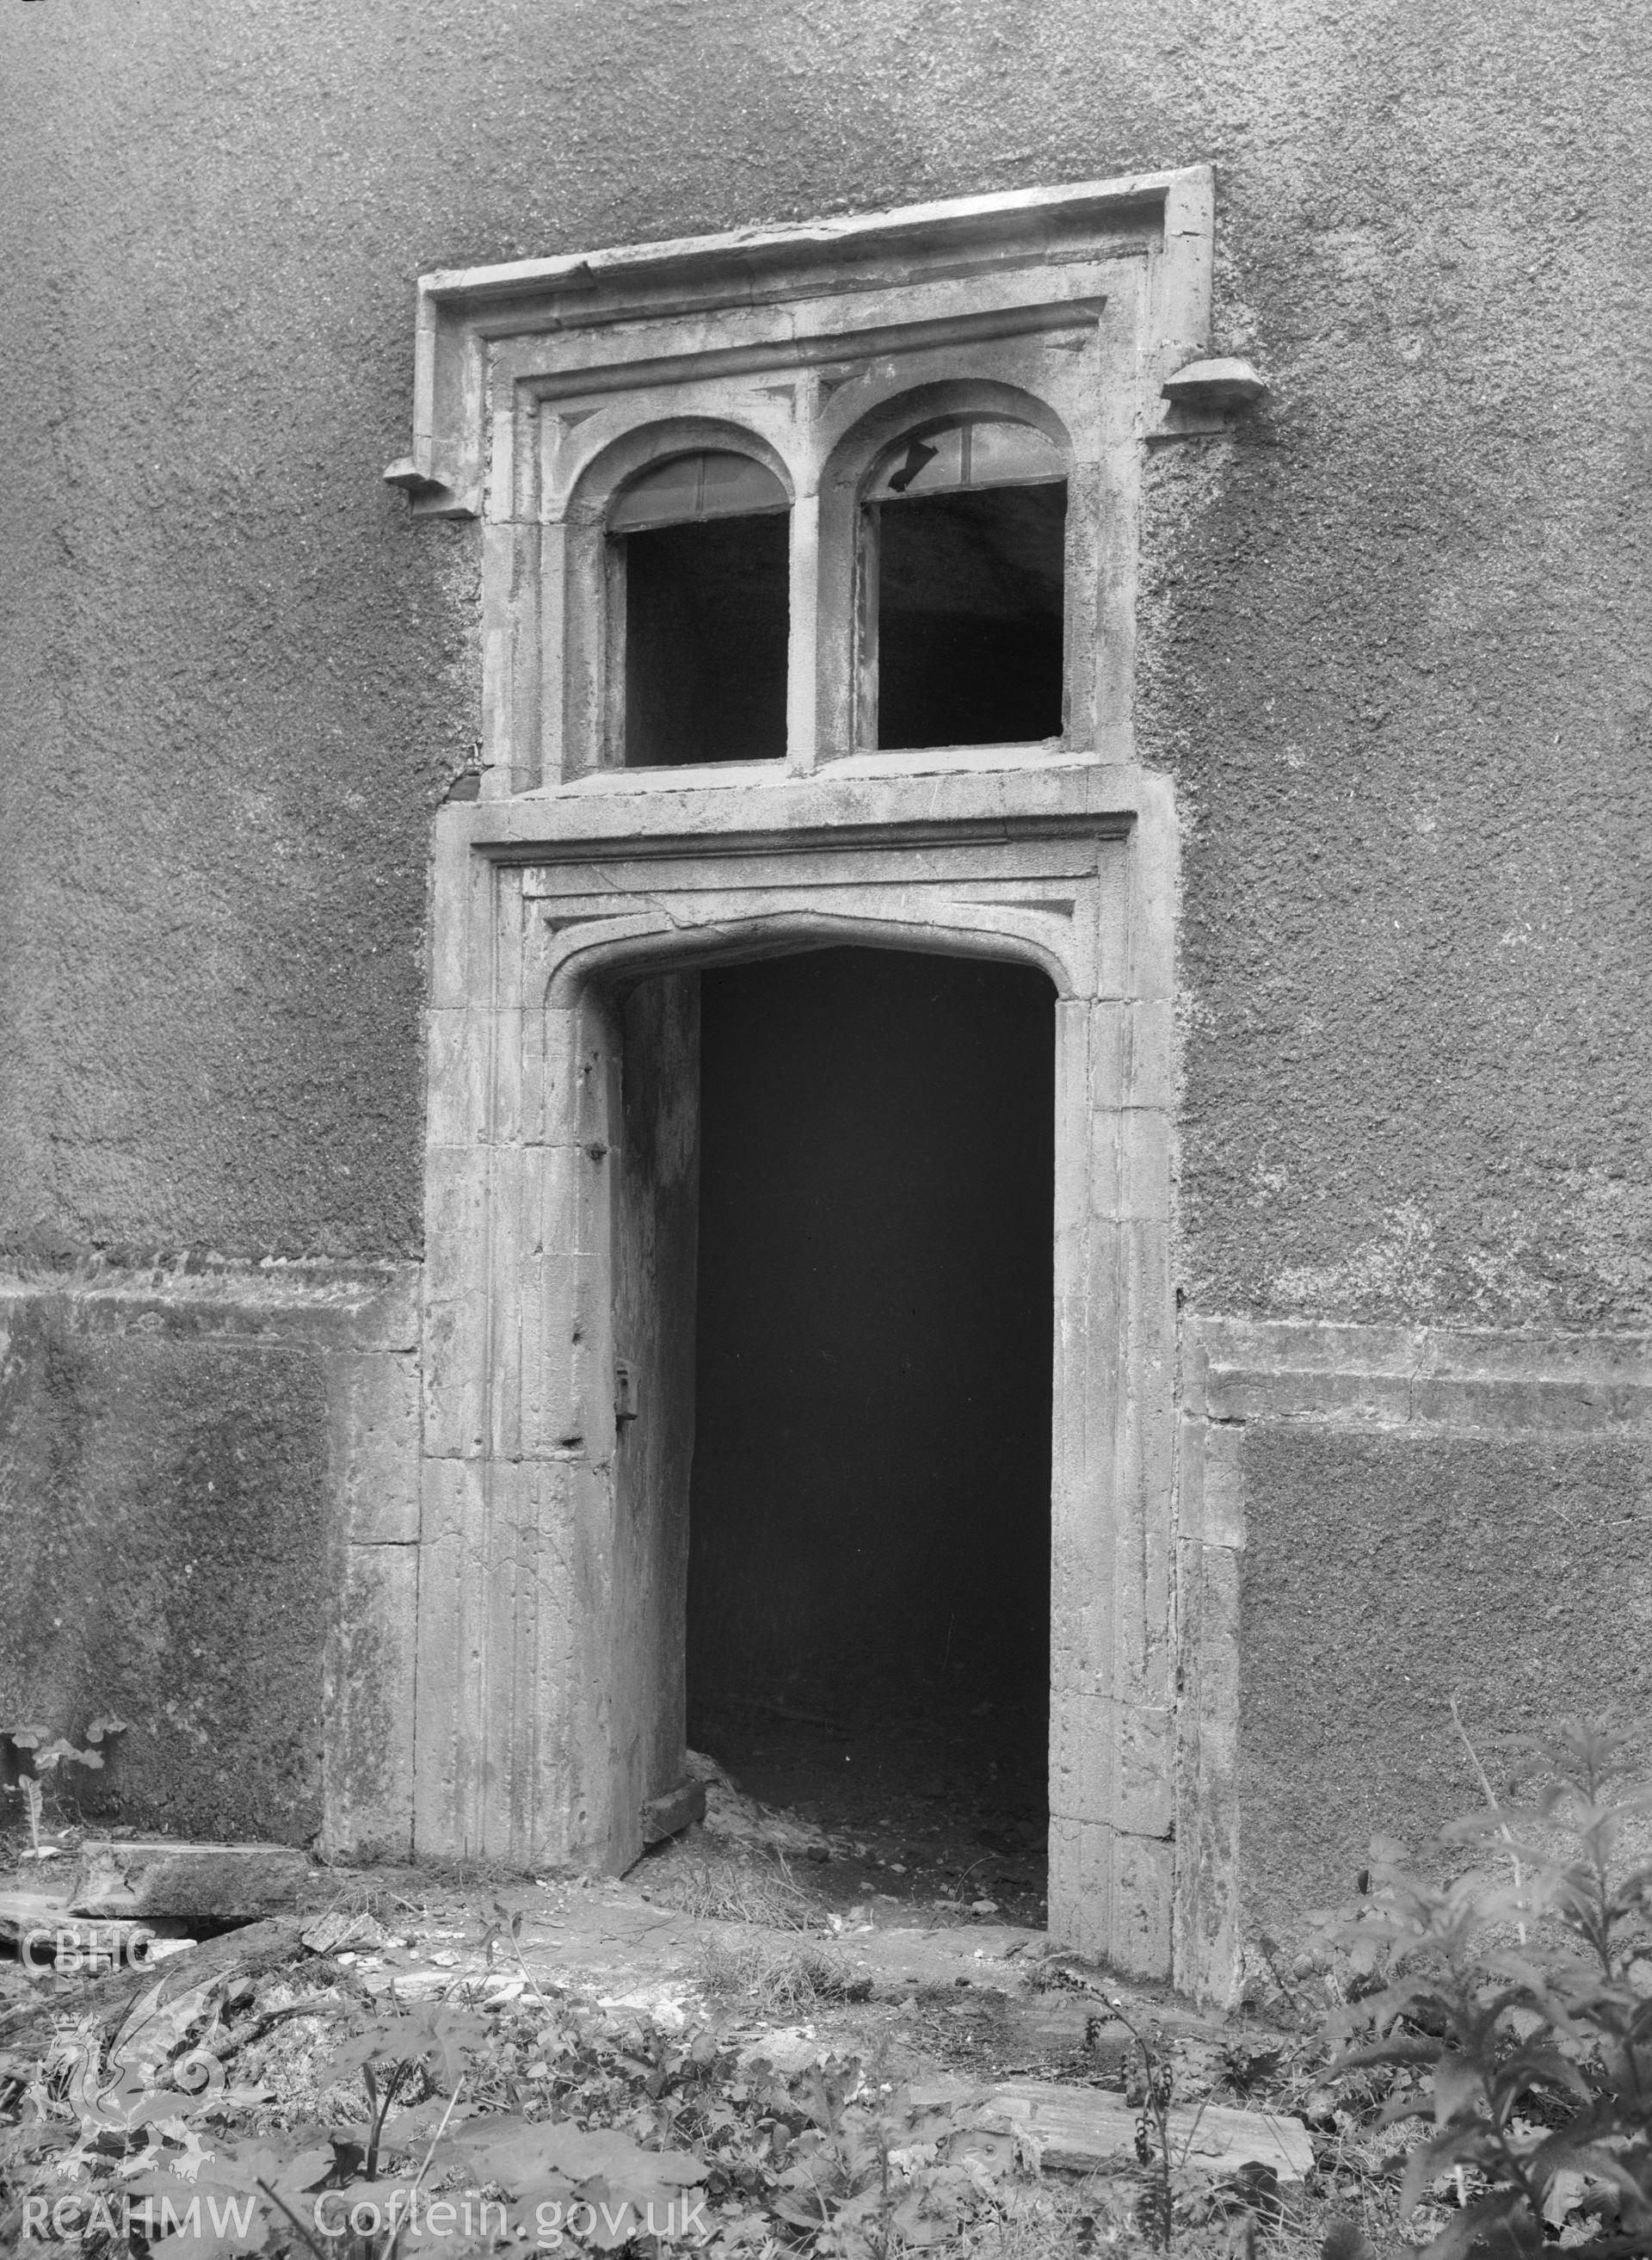 View of the north-east basement entrances at Ruperra Castle, taken in 1962.